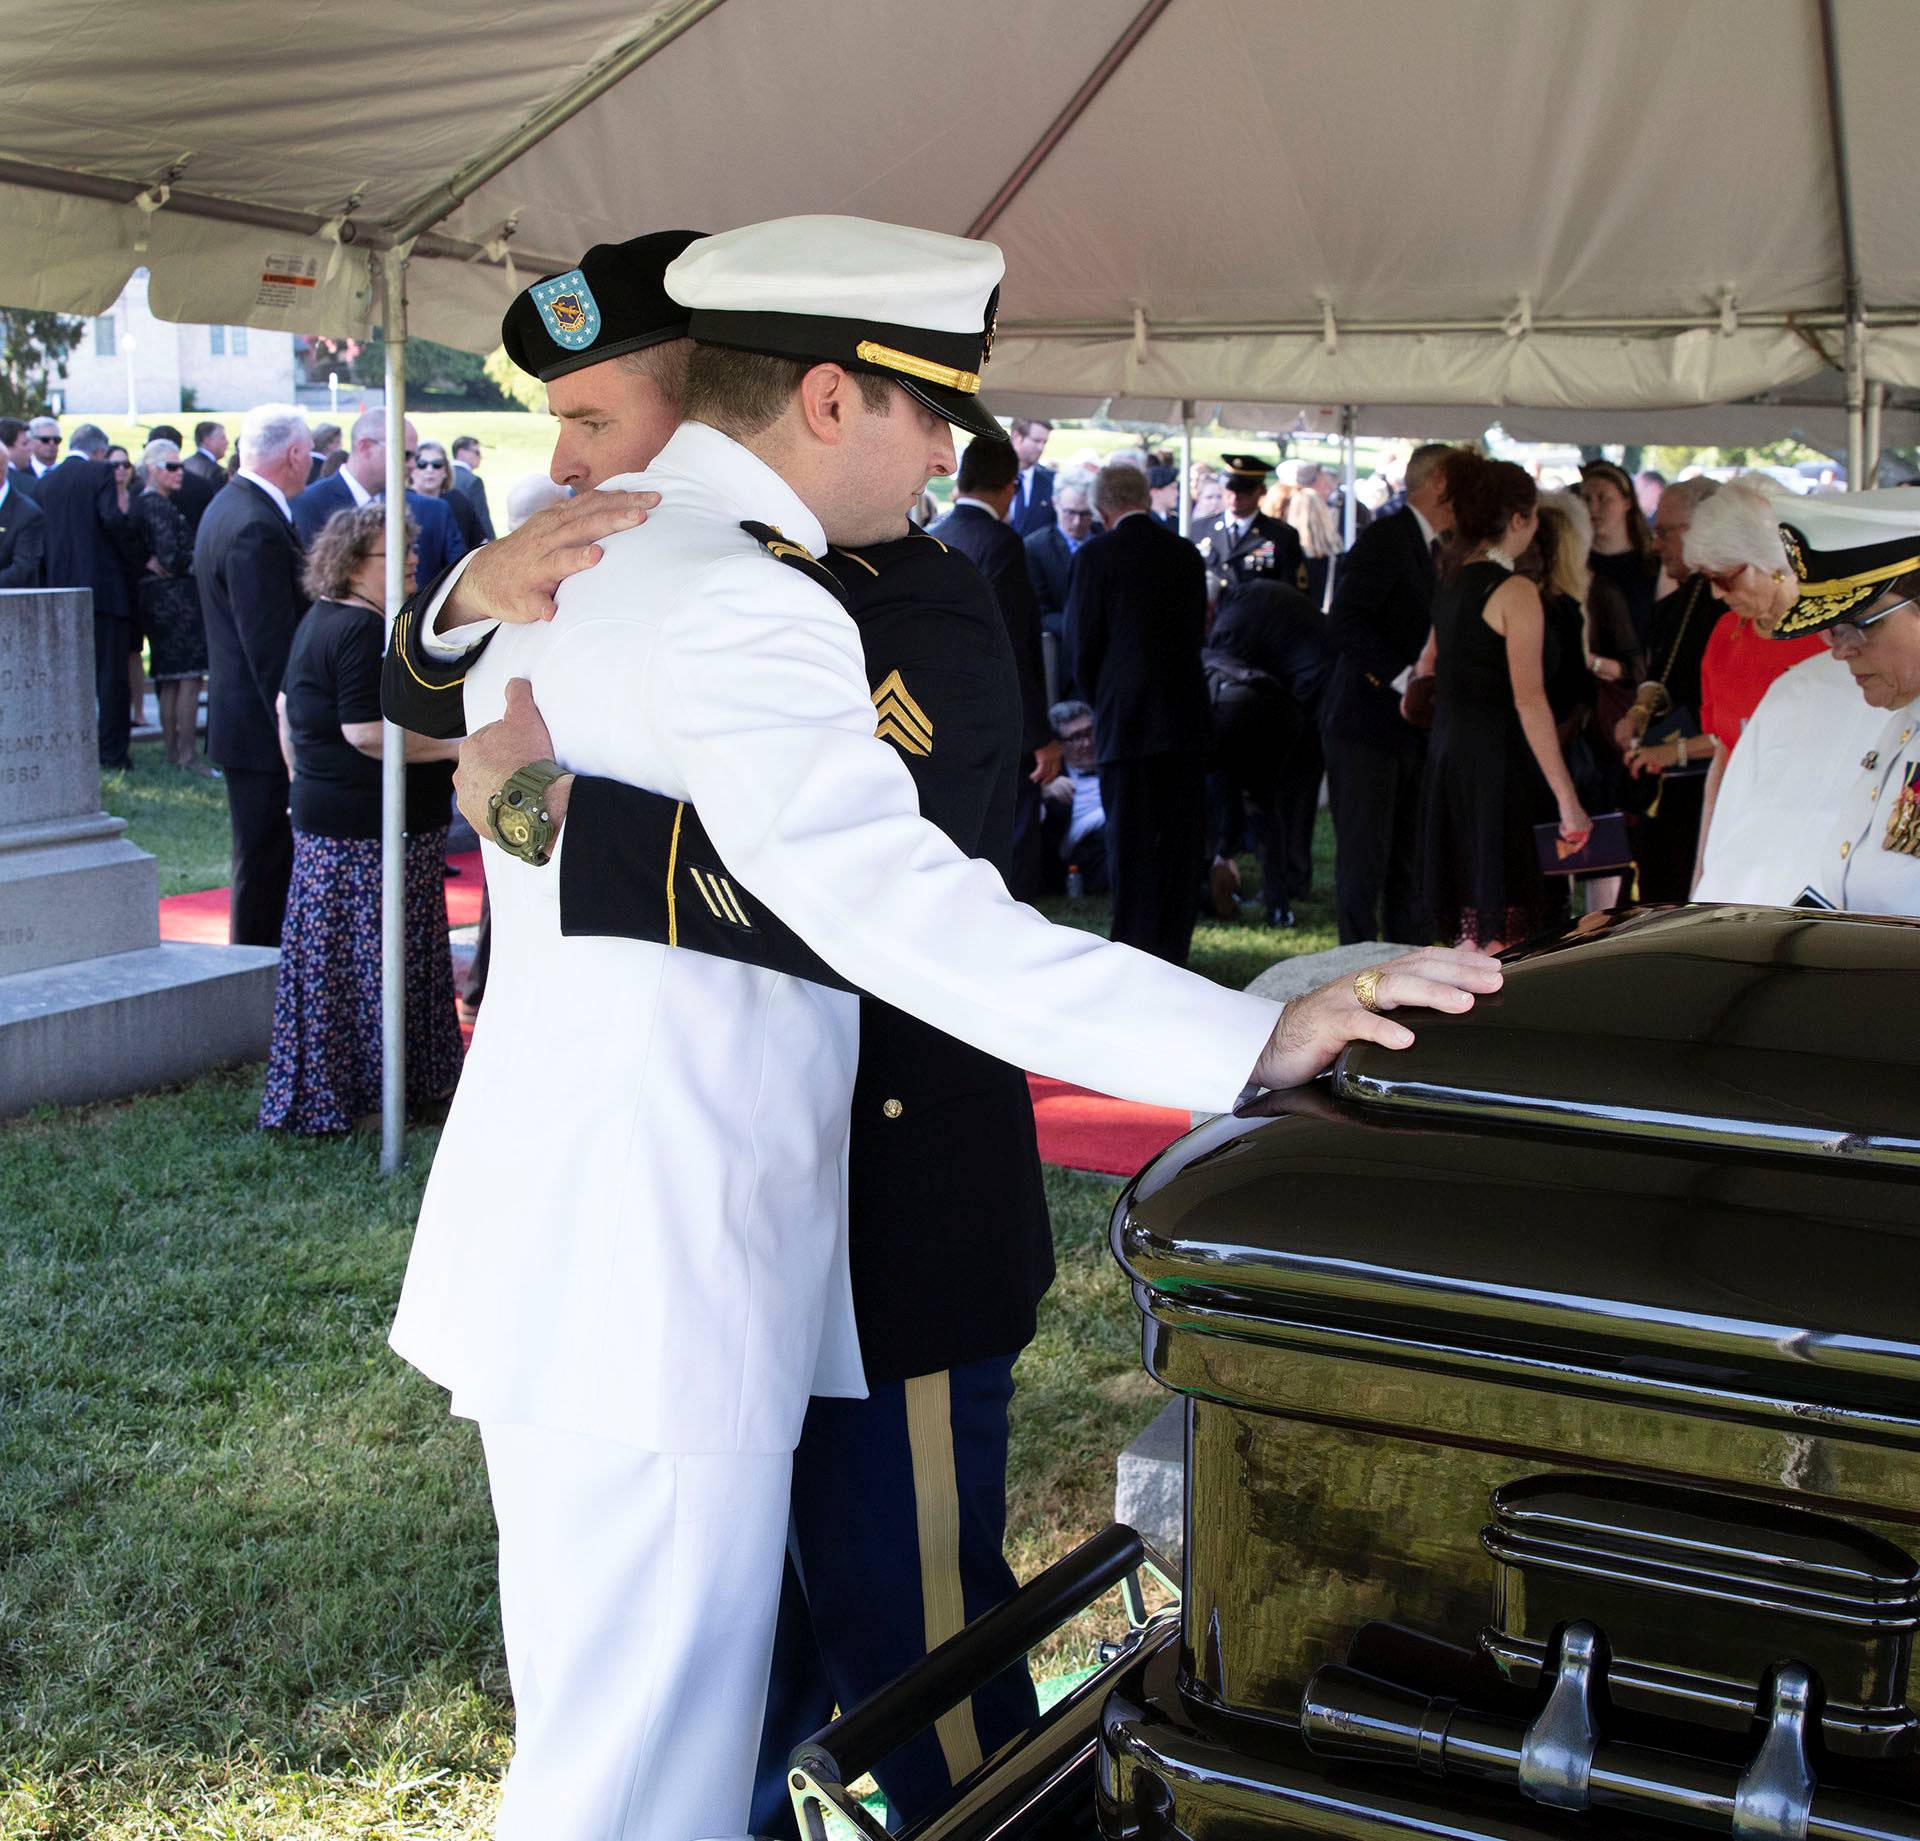 Jimmy McCain hugs his brother Jack during a burial service for McCain in Annapolis